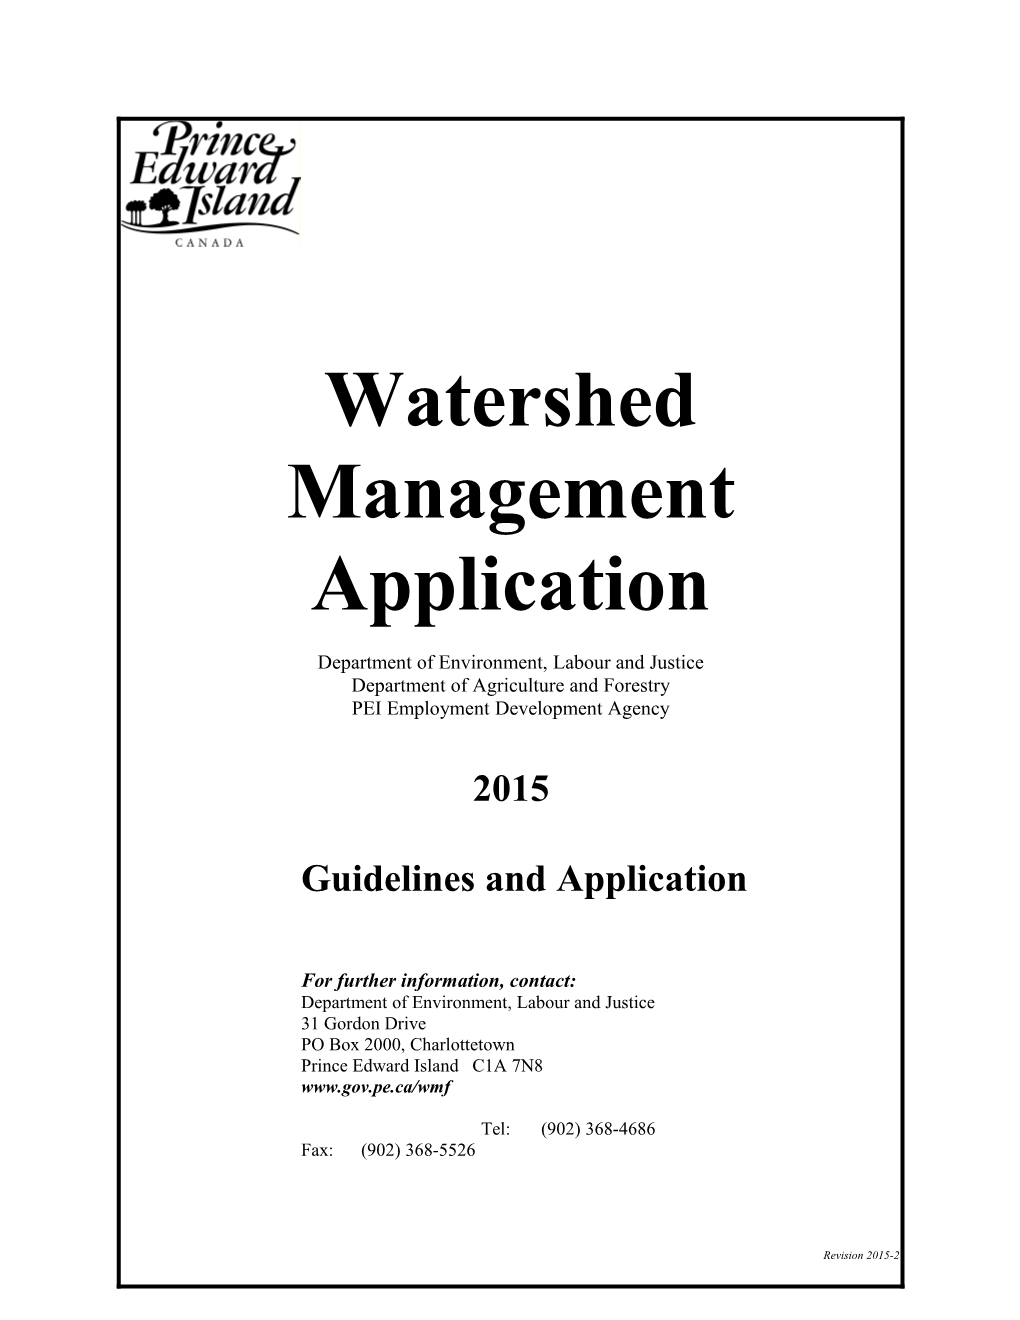 Watershed Management Application